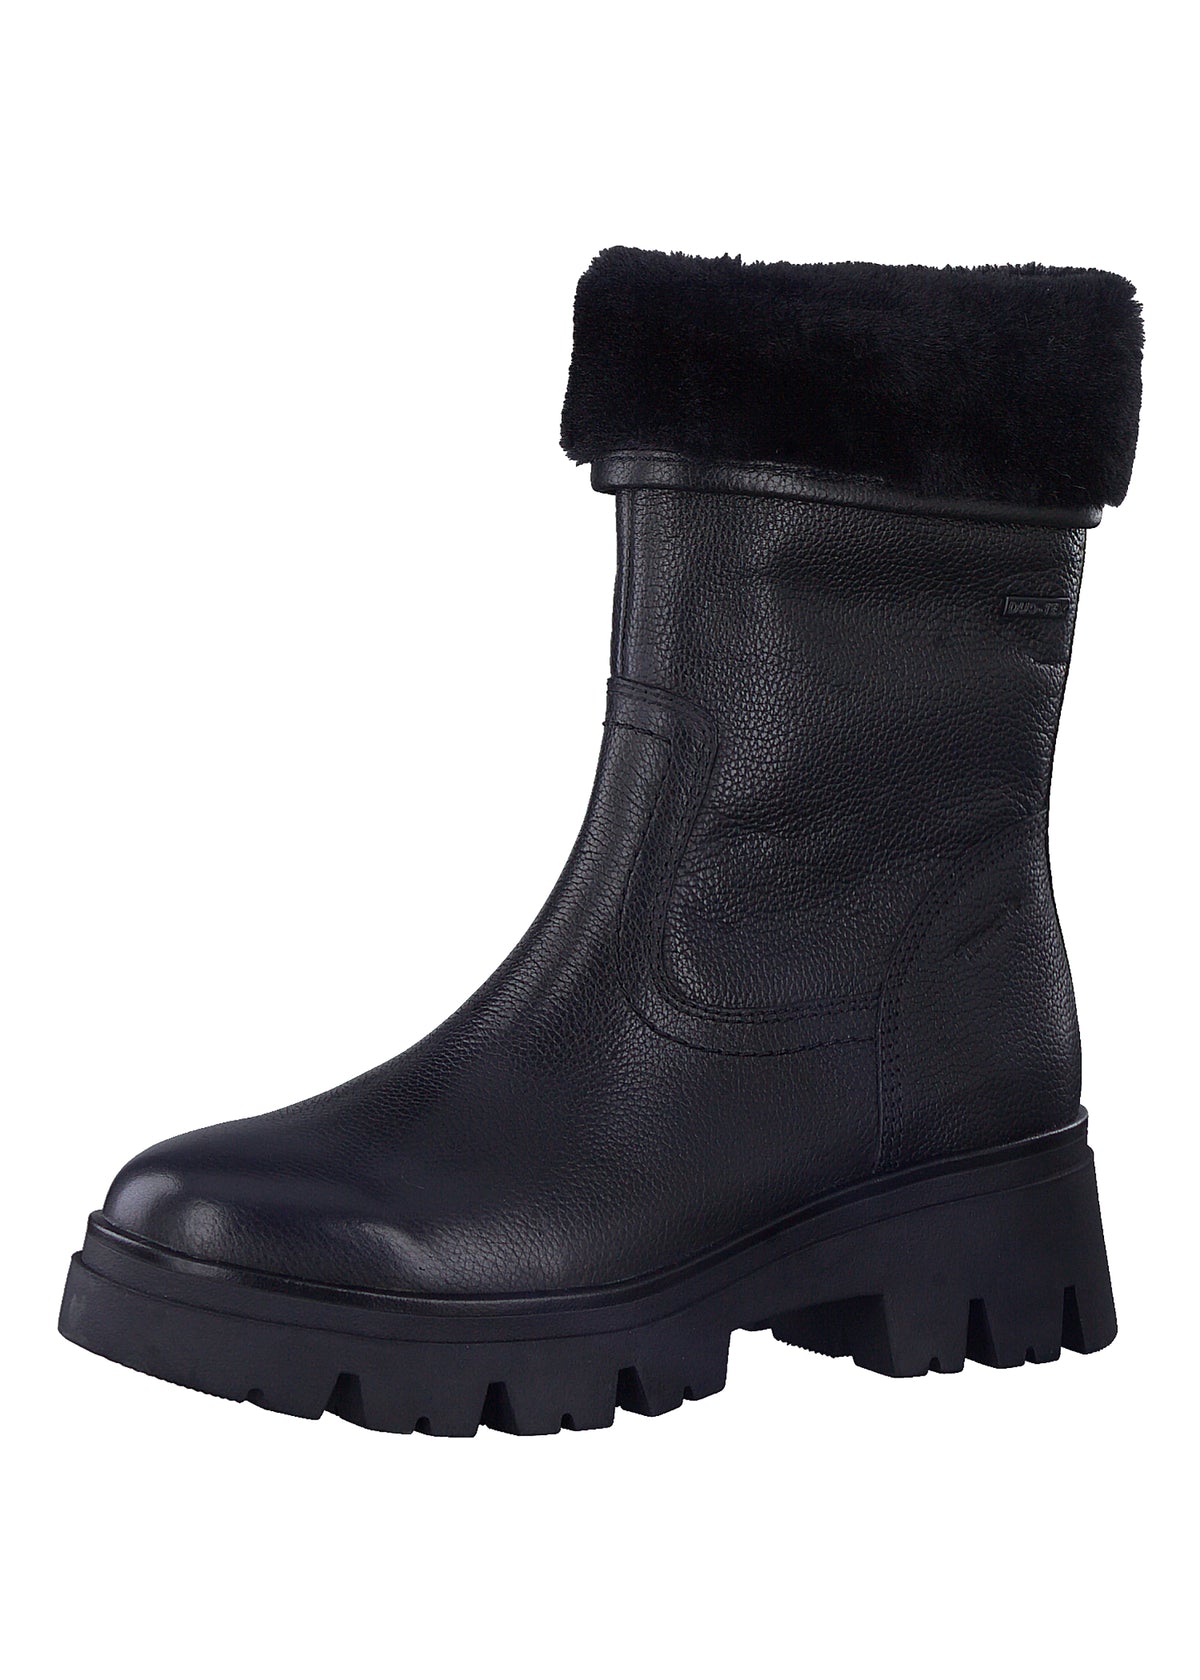 Winter ankle boots with a thick sole - black, tex membrane